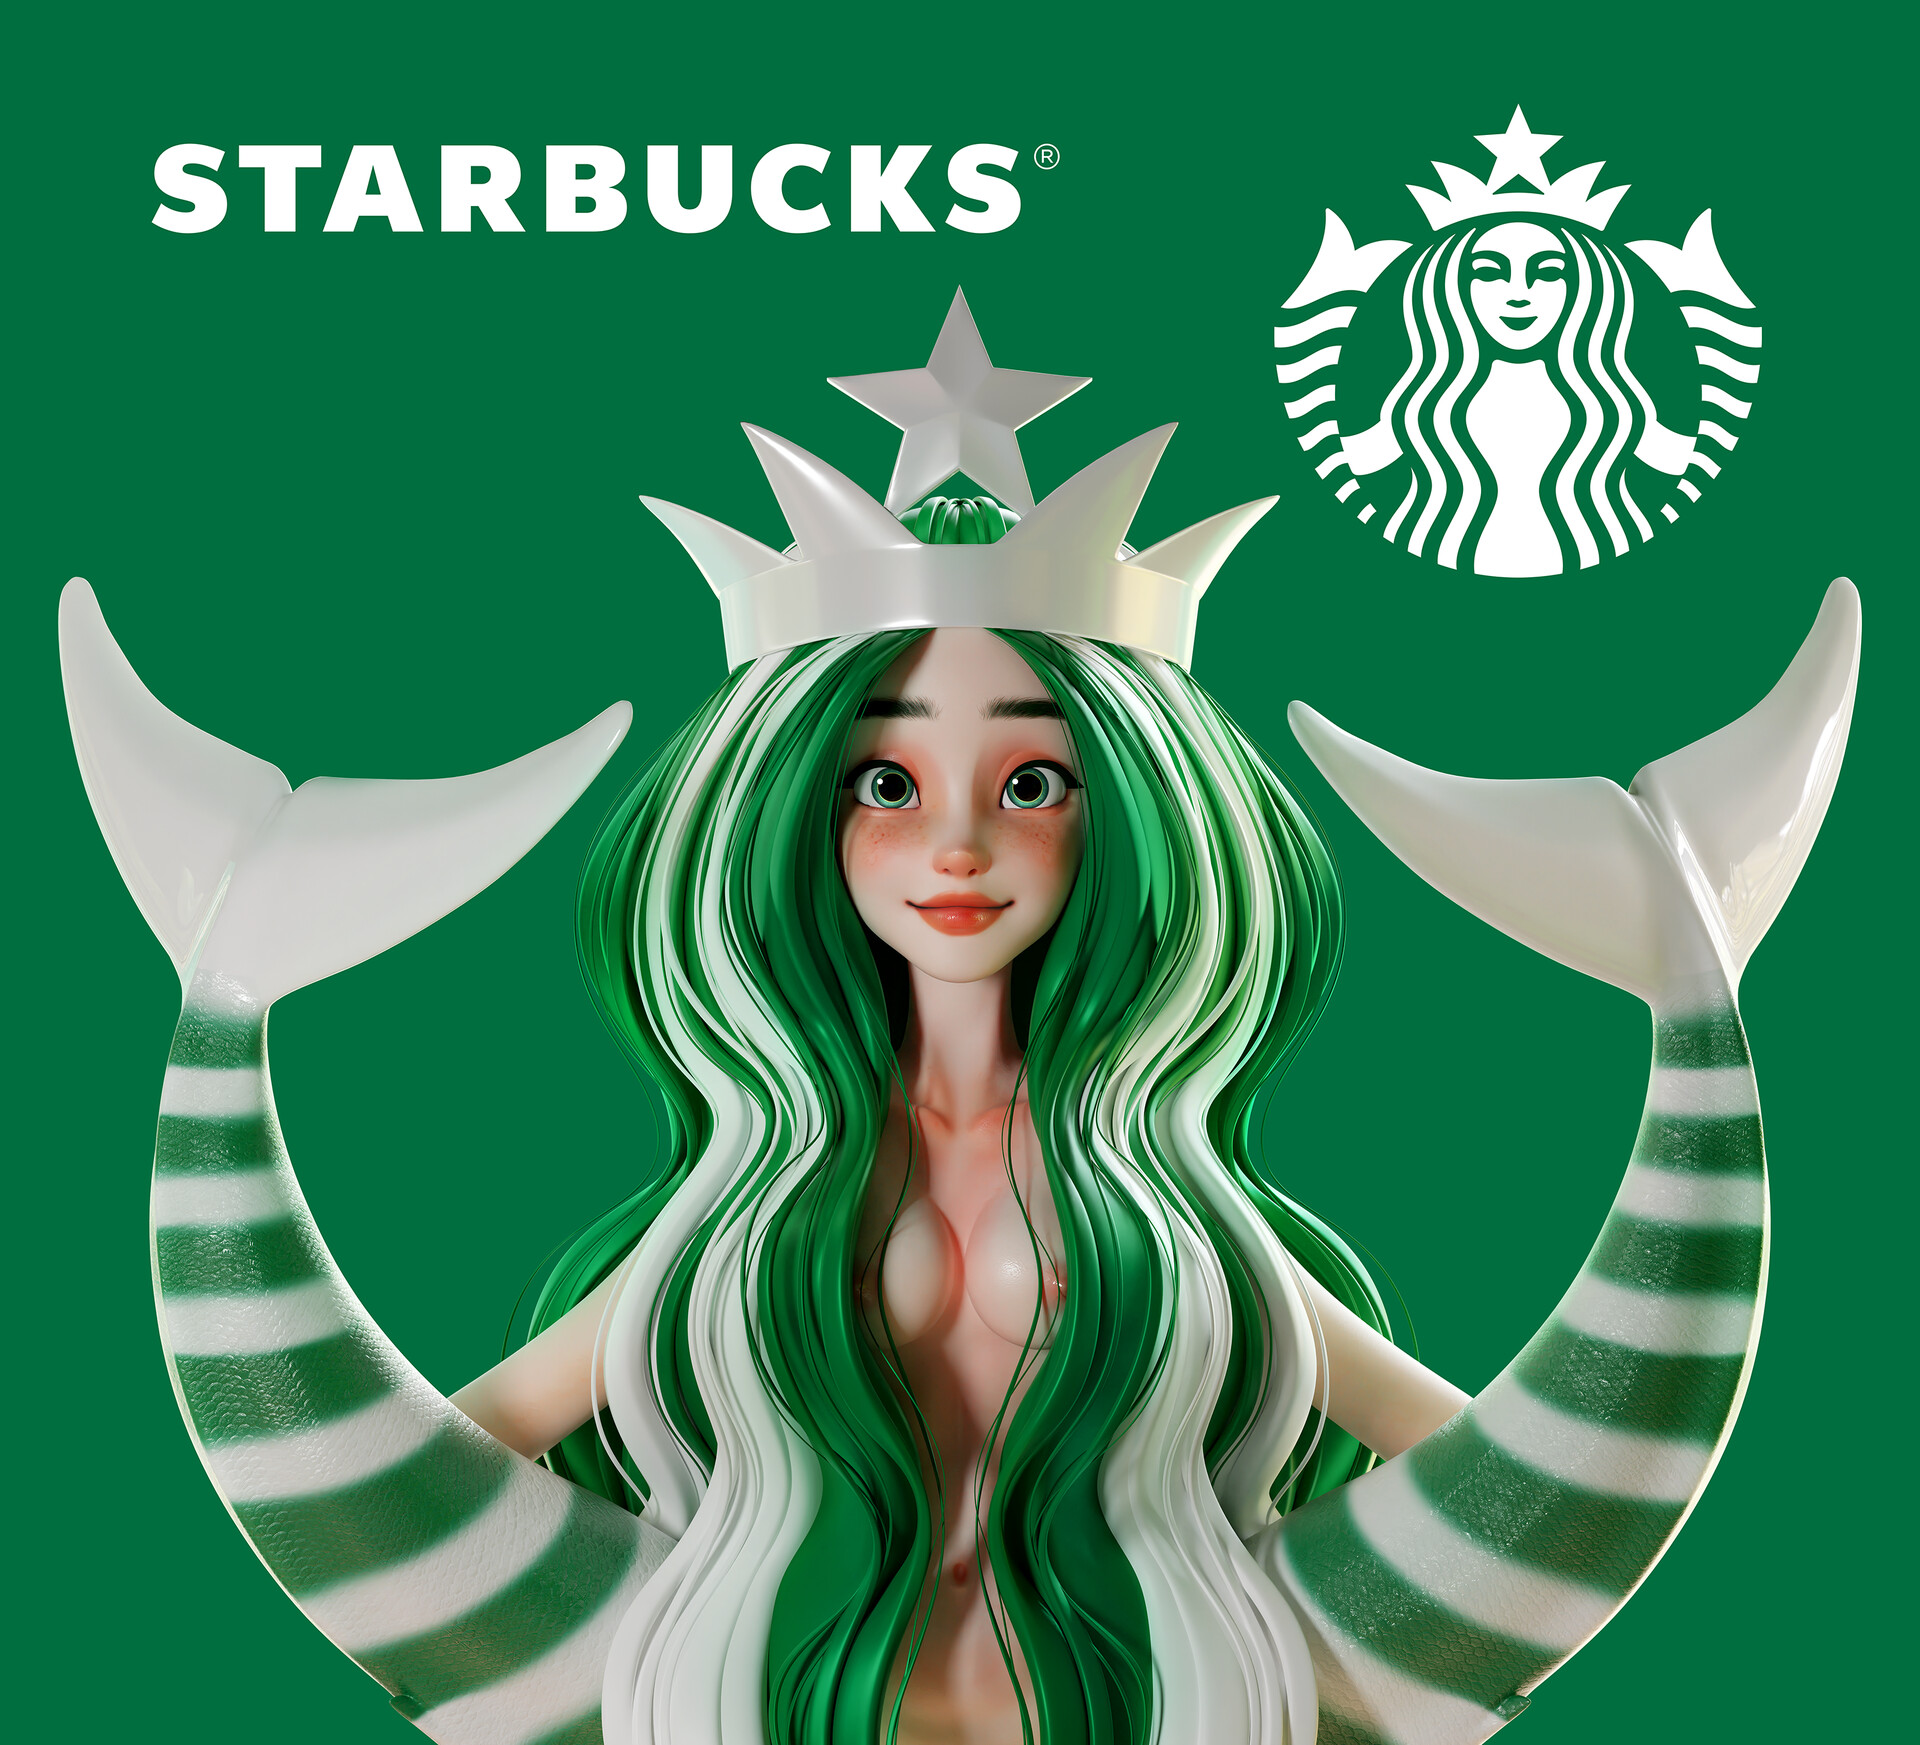 Top 99 Picture Of Starbucks Logo Most Viewed And Downloaded Wikipedia